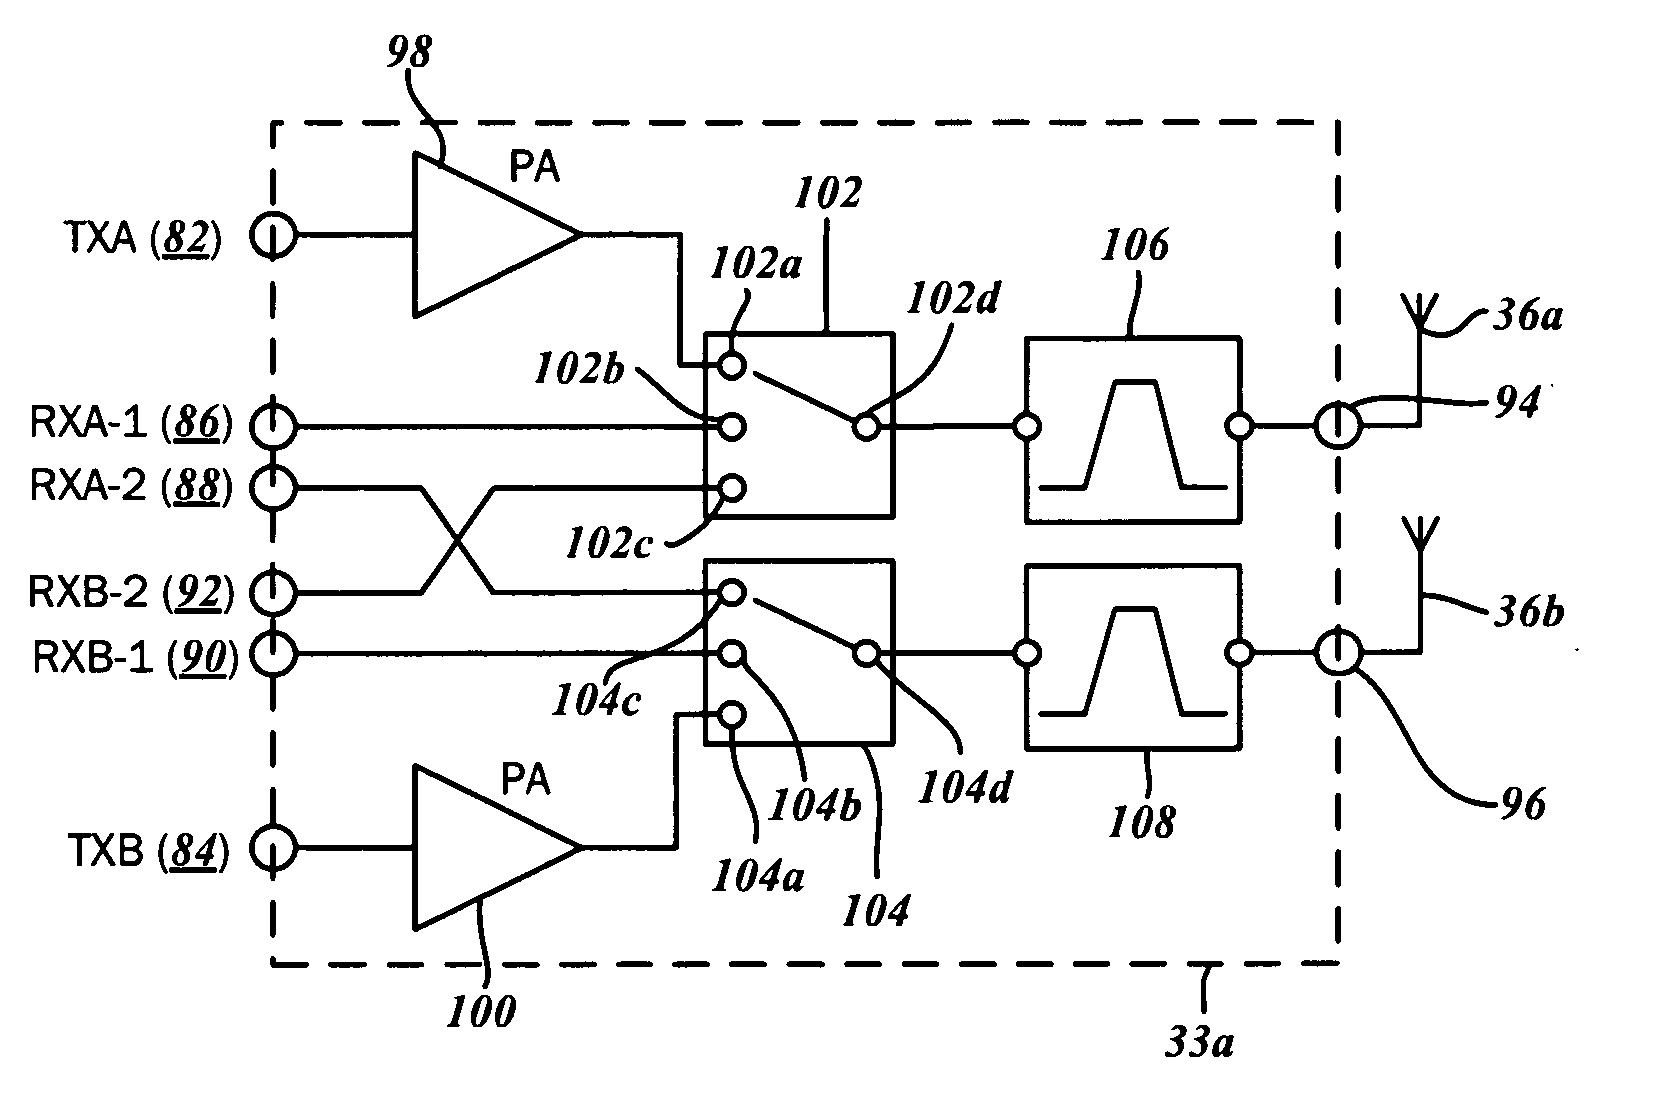 Multi-channel radio frequency front end circuit with full transmit and receive diversity for multi-path mitigation